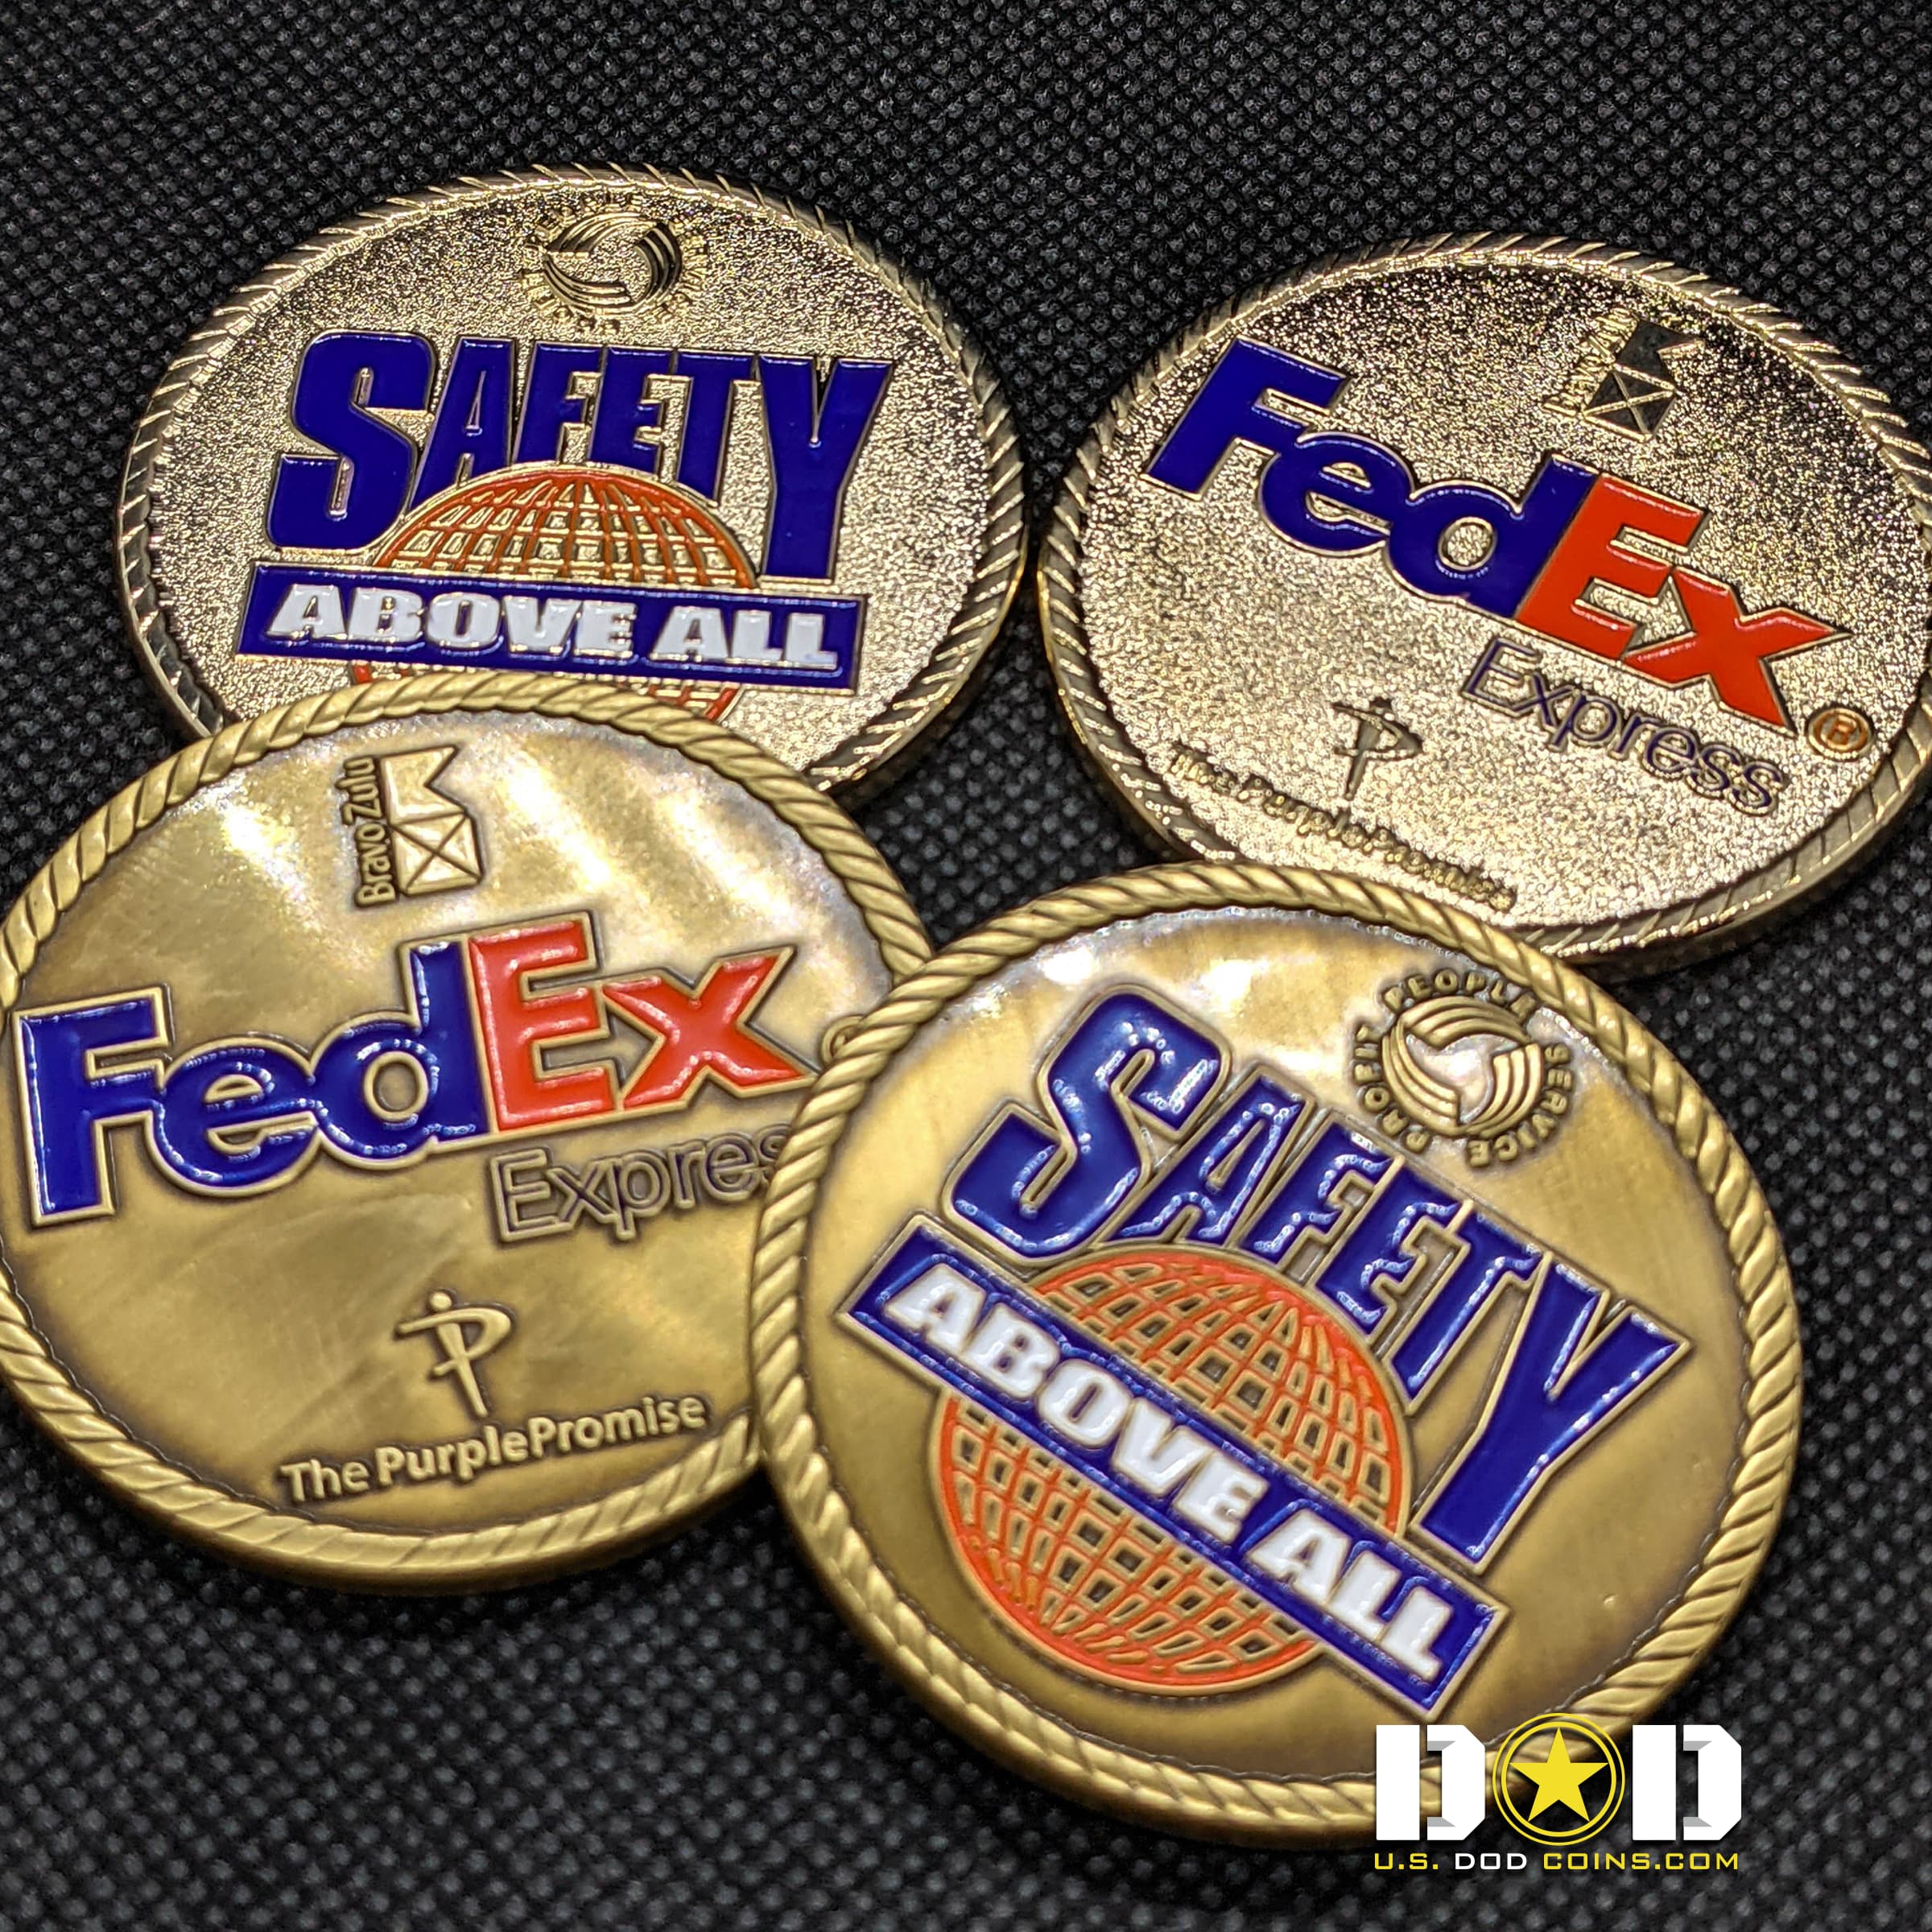 FedEx-Express-Challenge-Coin_0004_USDODCoins-Challenge-Coins-Examples-9